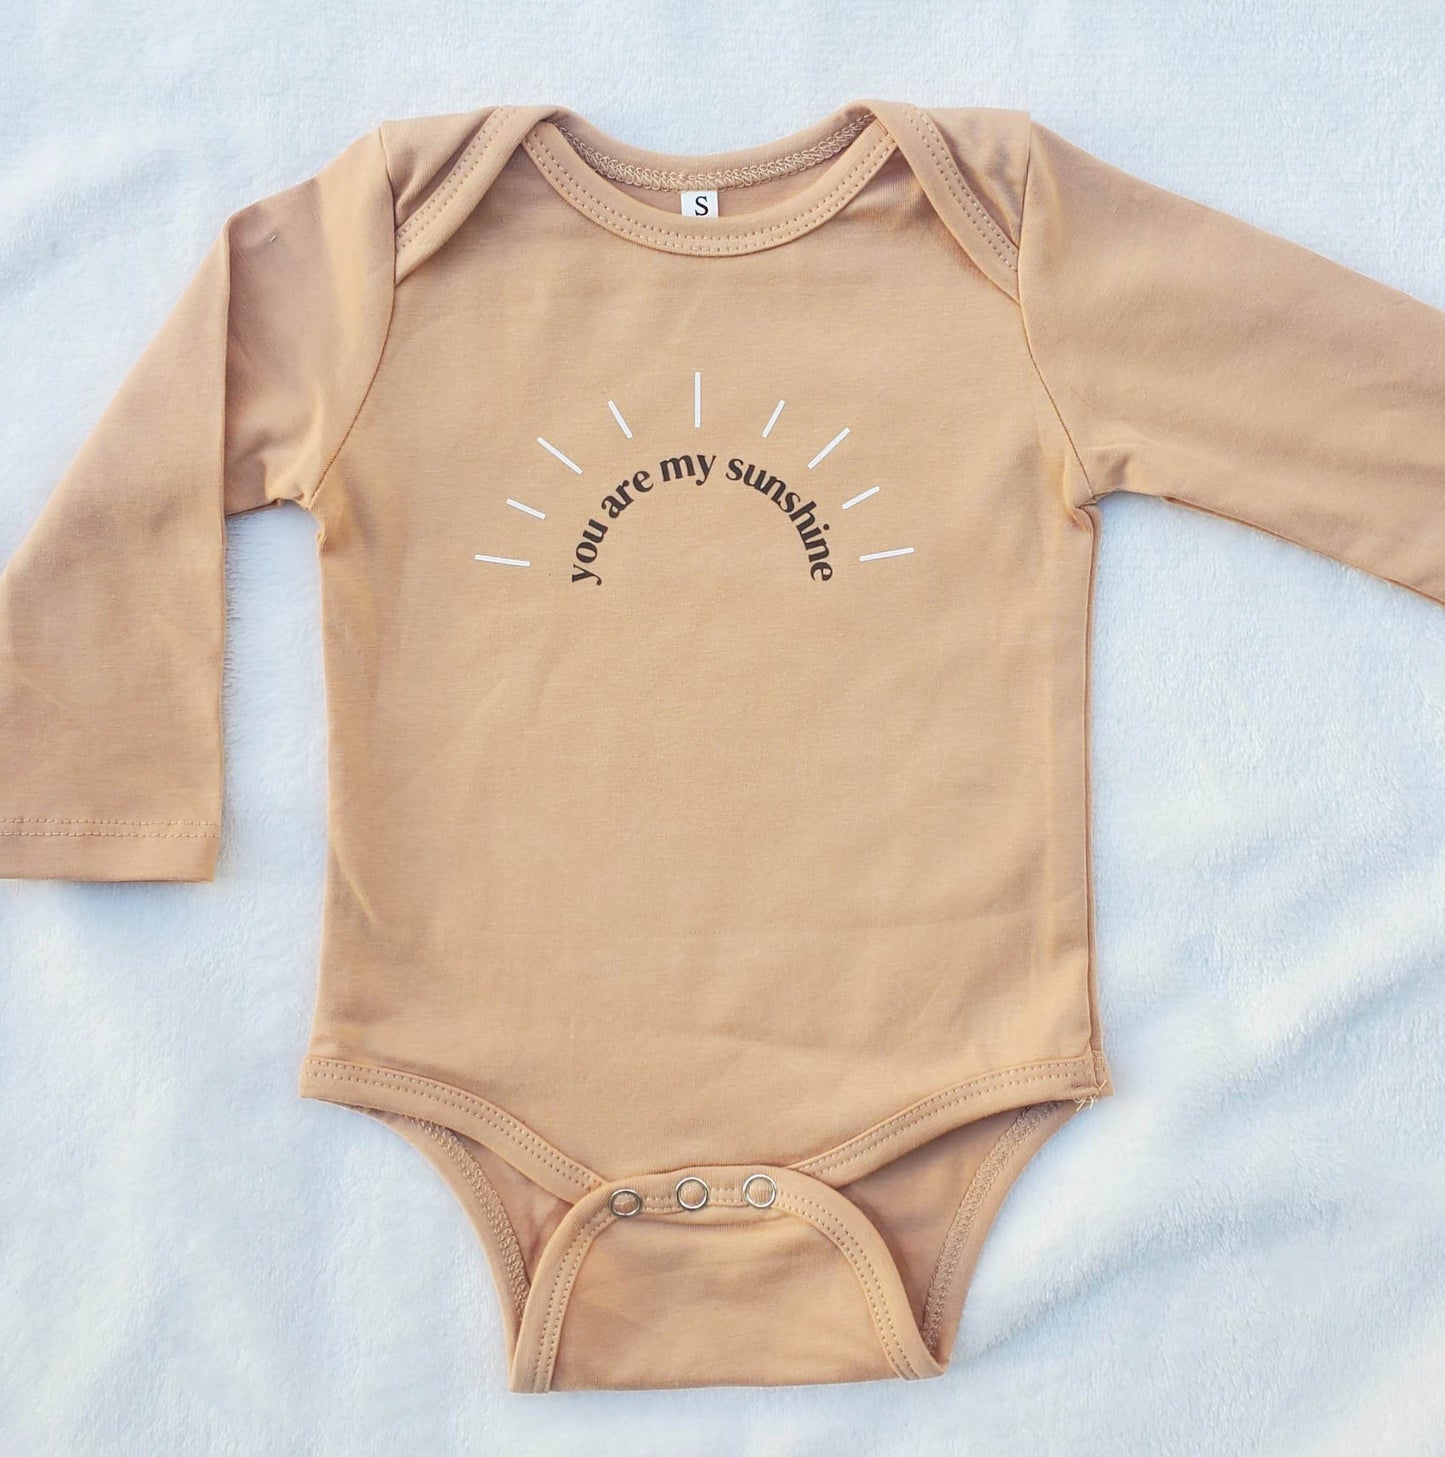 You Are My Sunshine - Neutral Tone Baby Onesie And Toddler Shirt